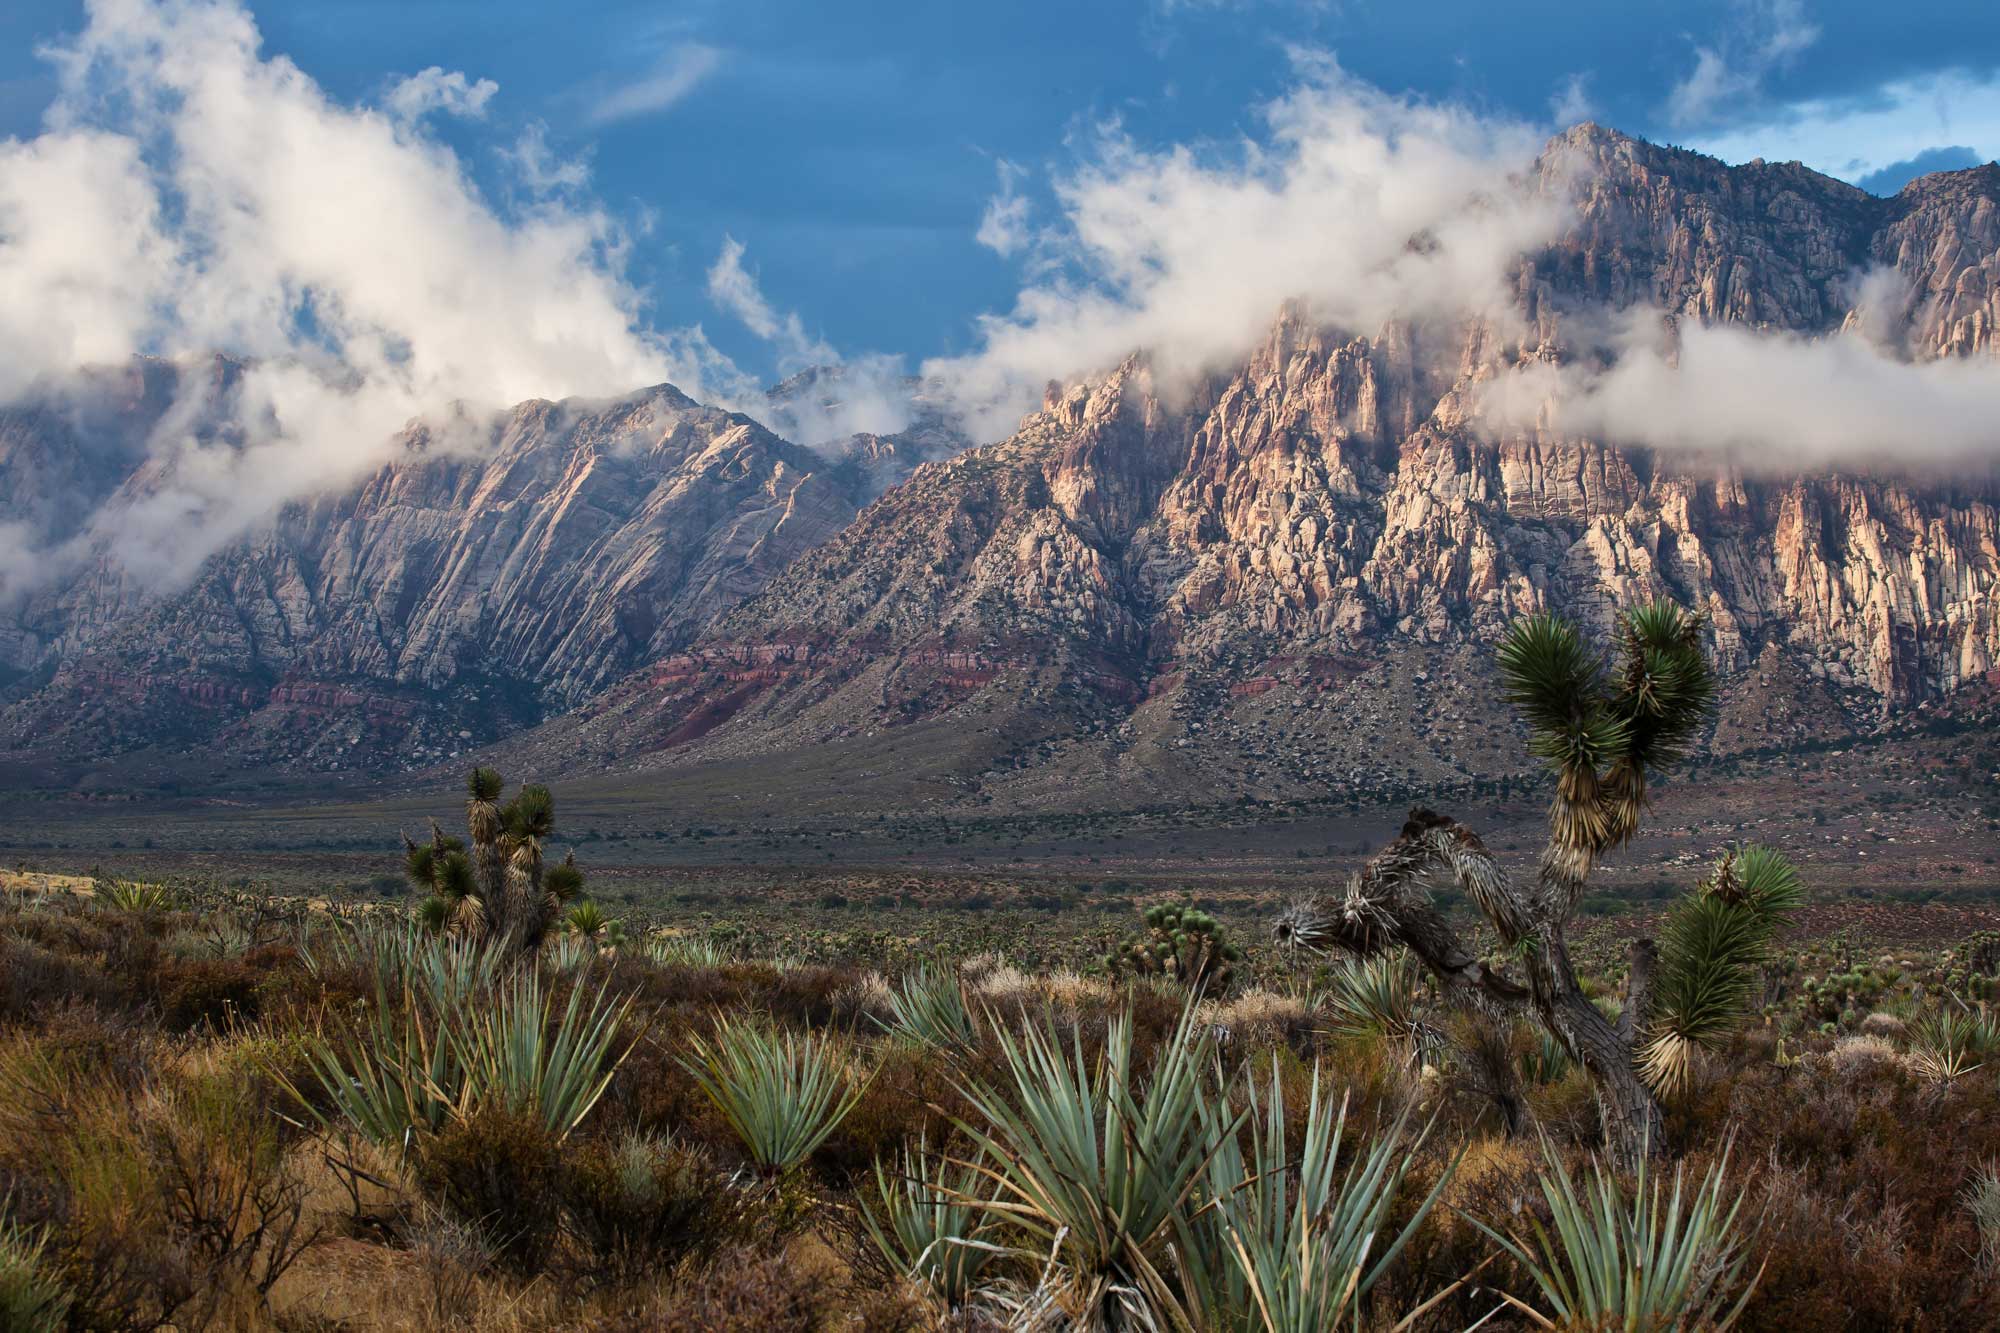 Photograph of Red Rock Escarpment in Red Rock Canyon Conservation Area, southern Nevada. The photo shows a landscape with sharp, rocky hills rising in the background. The hills are made up of beige and reddish rocks. The land in the foreground is flat and covered with low vegetation, including yuccas and Joshua trees.